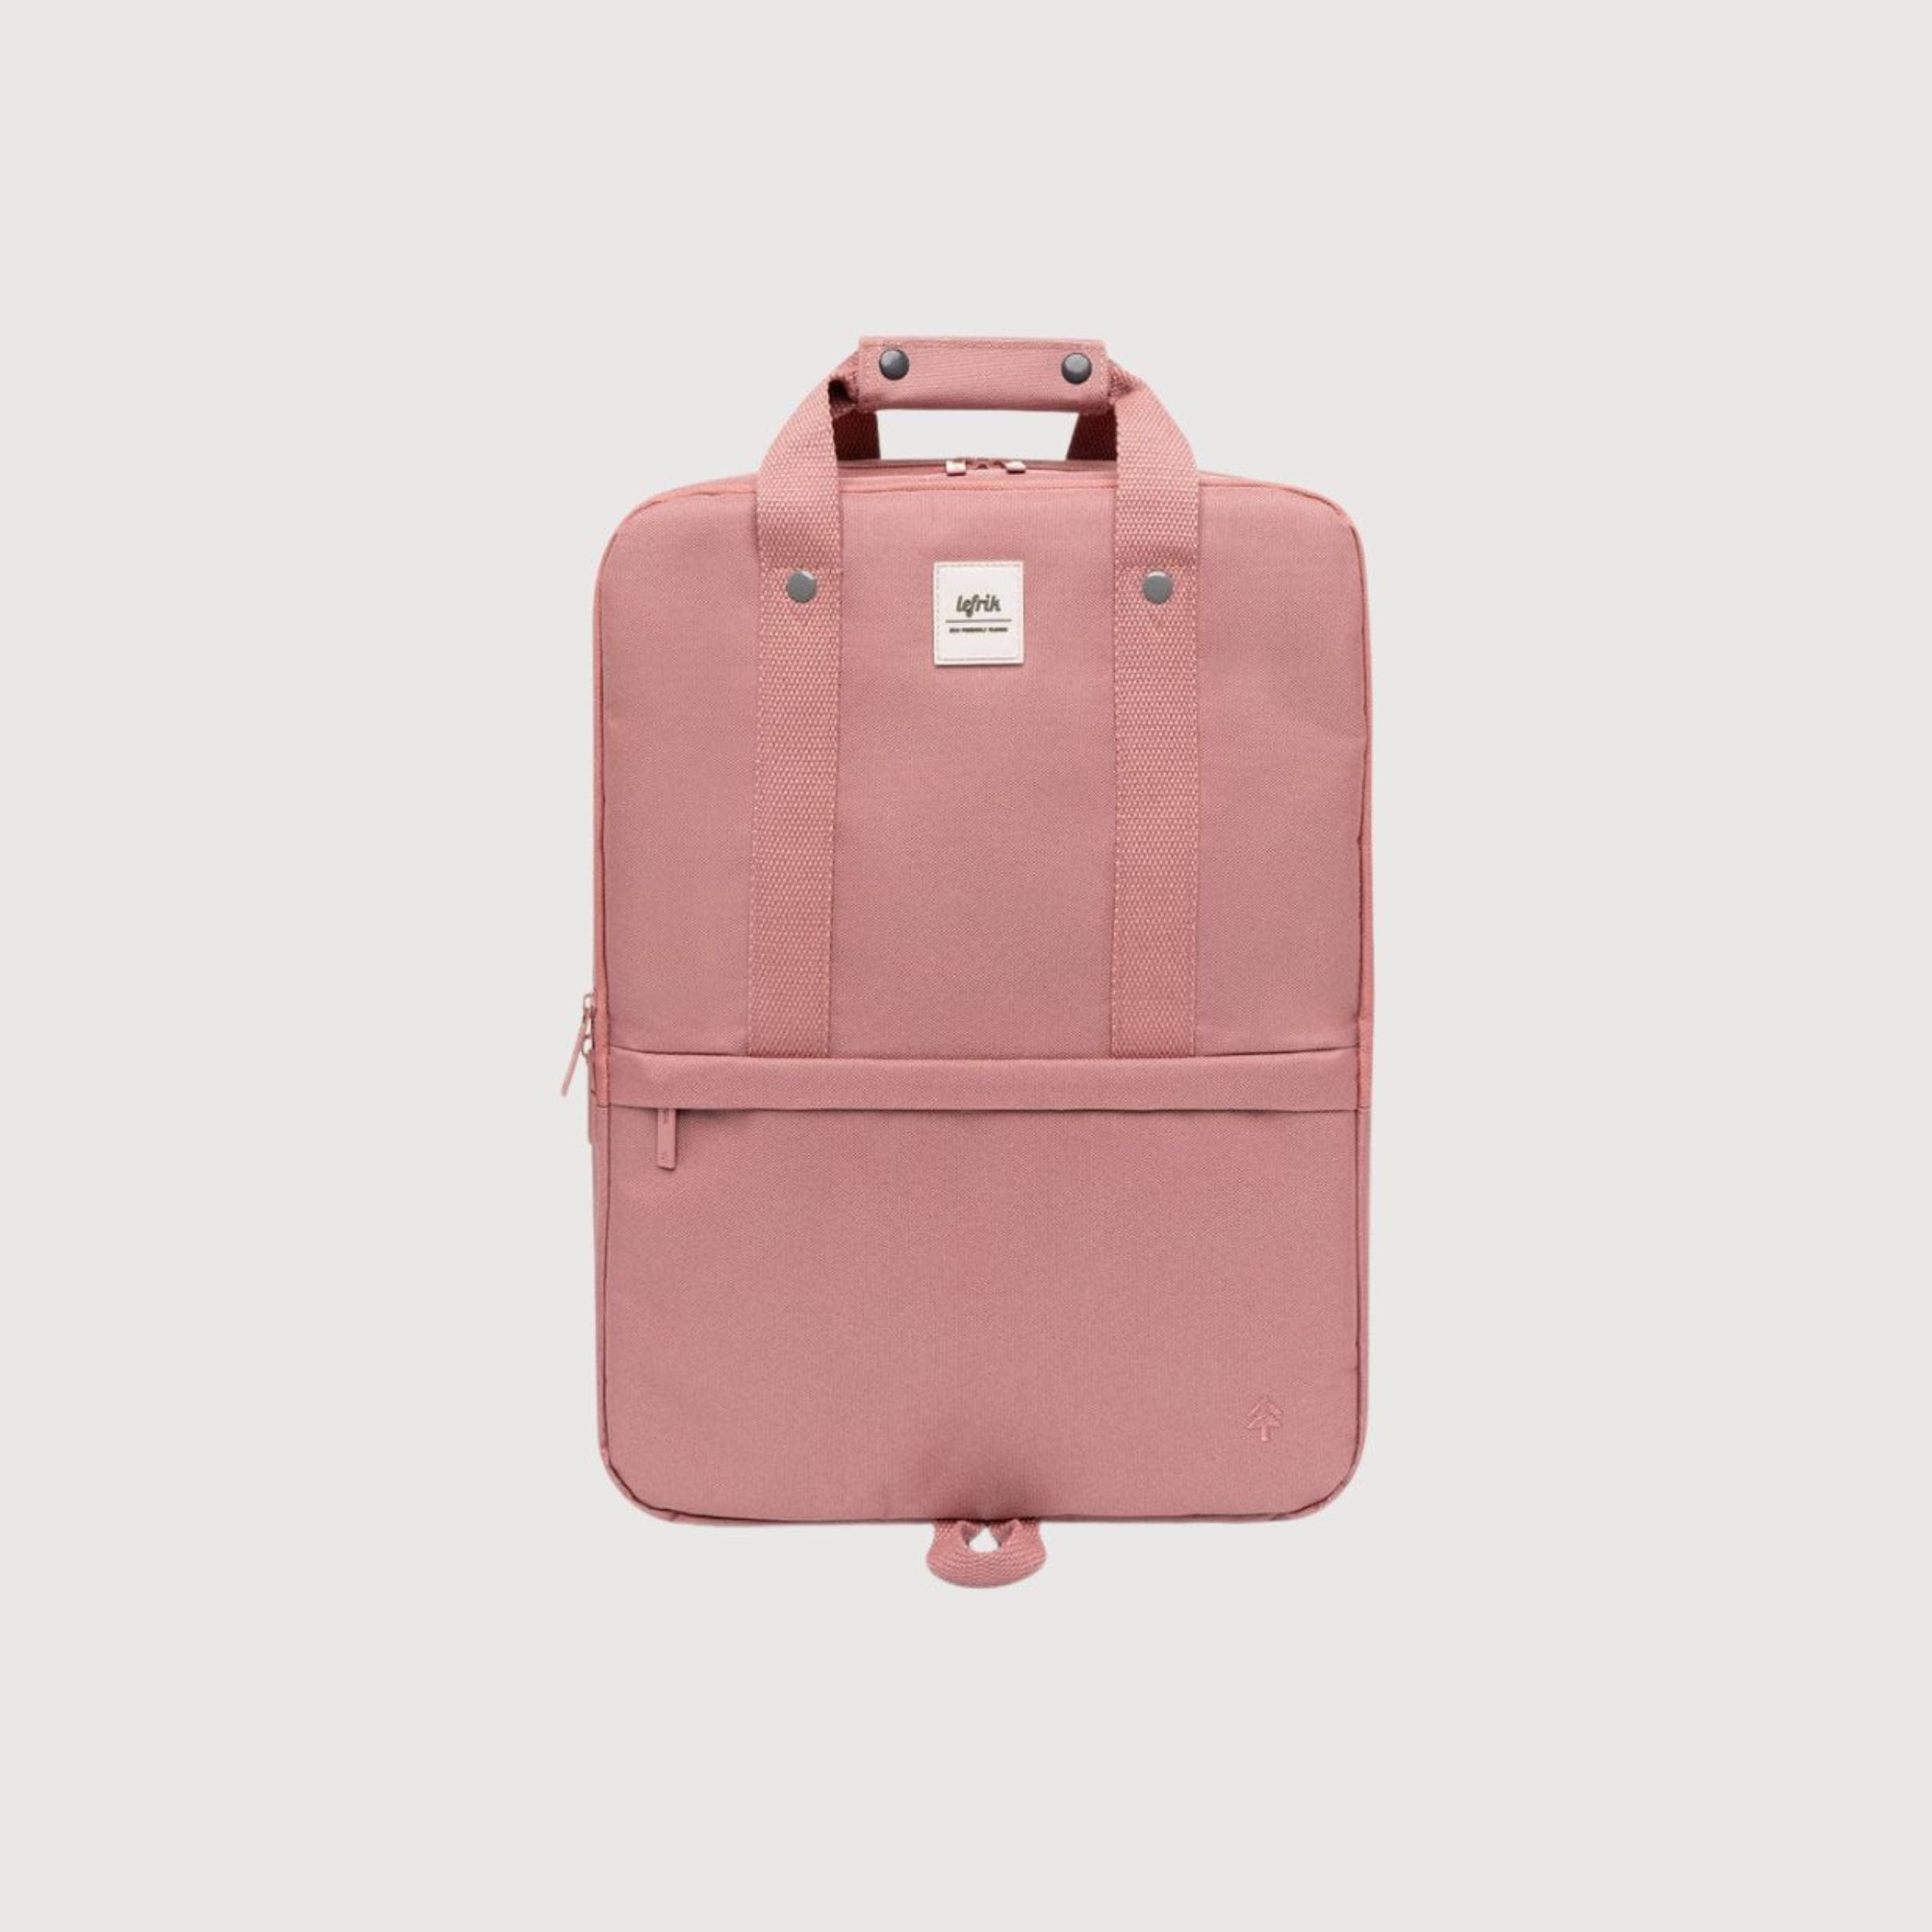 Backpack Laptop Daily 15 Dust Rosa in poliestere riciclato I lefrik